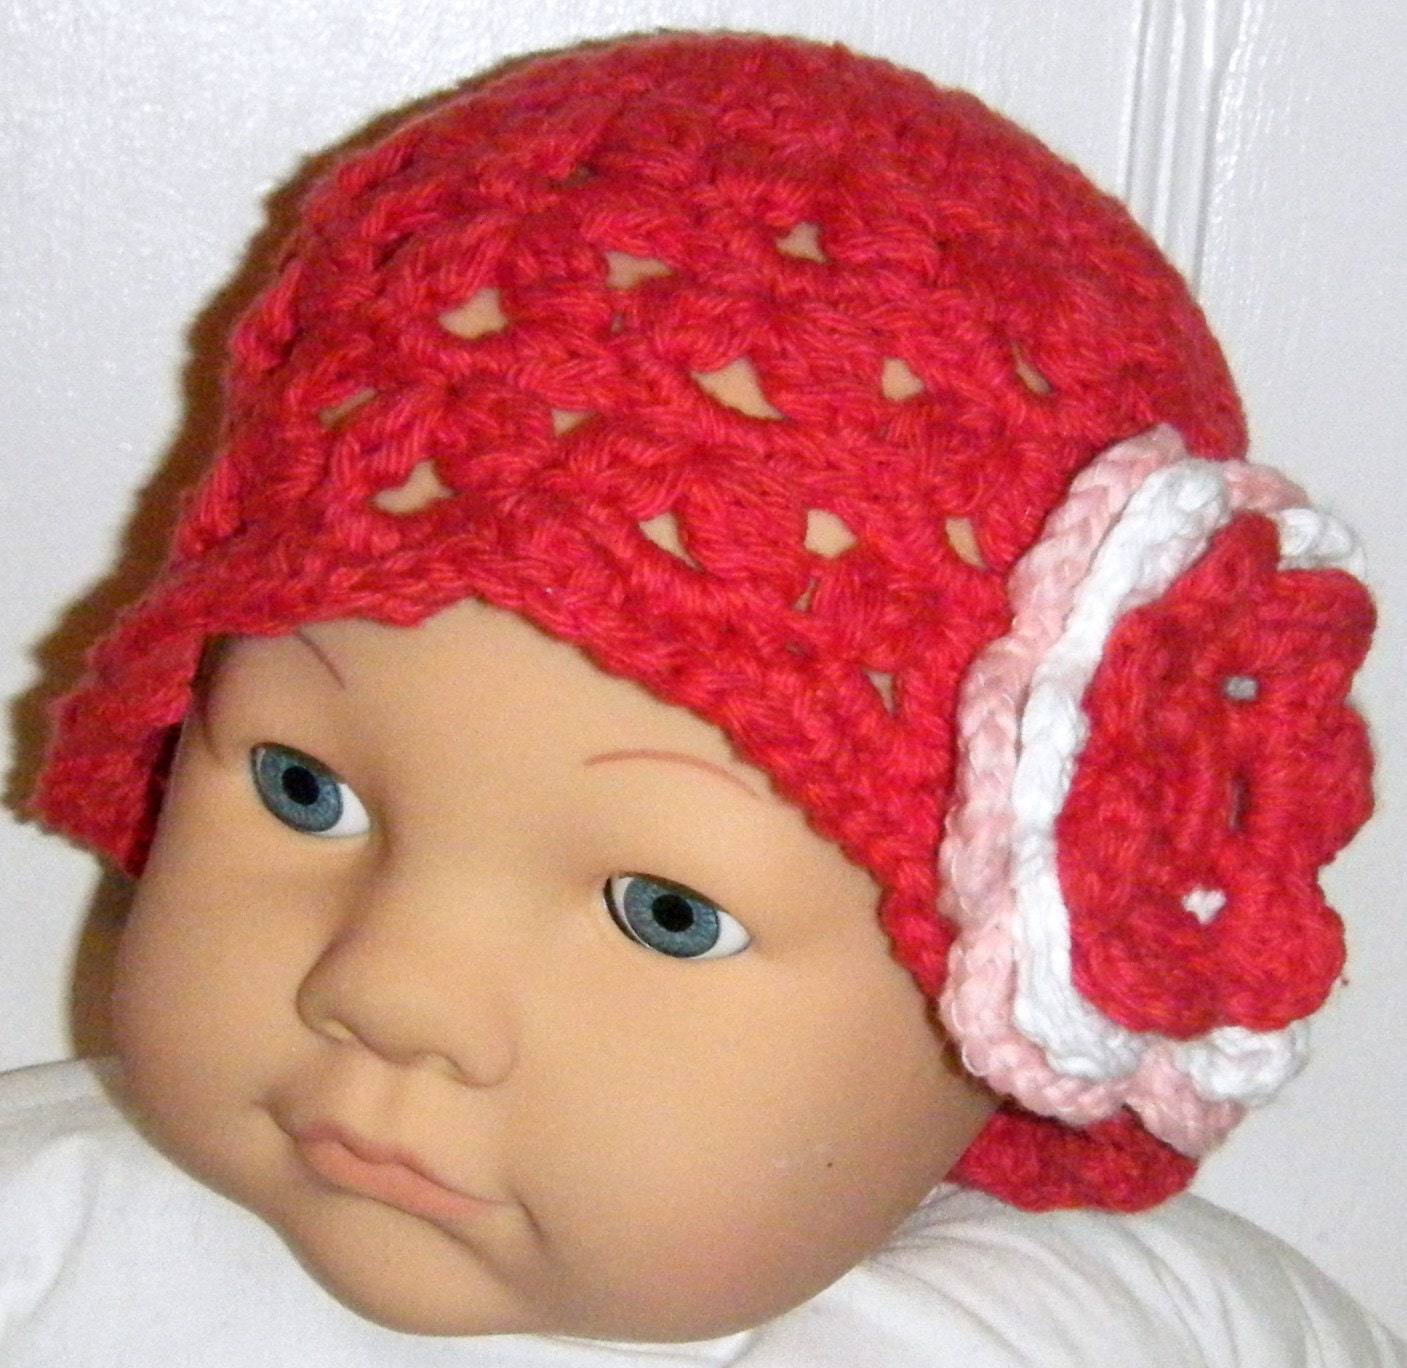 Handmade Crochet Hat with Flower 3 to 6 Months READY TO SHIP